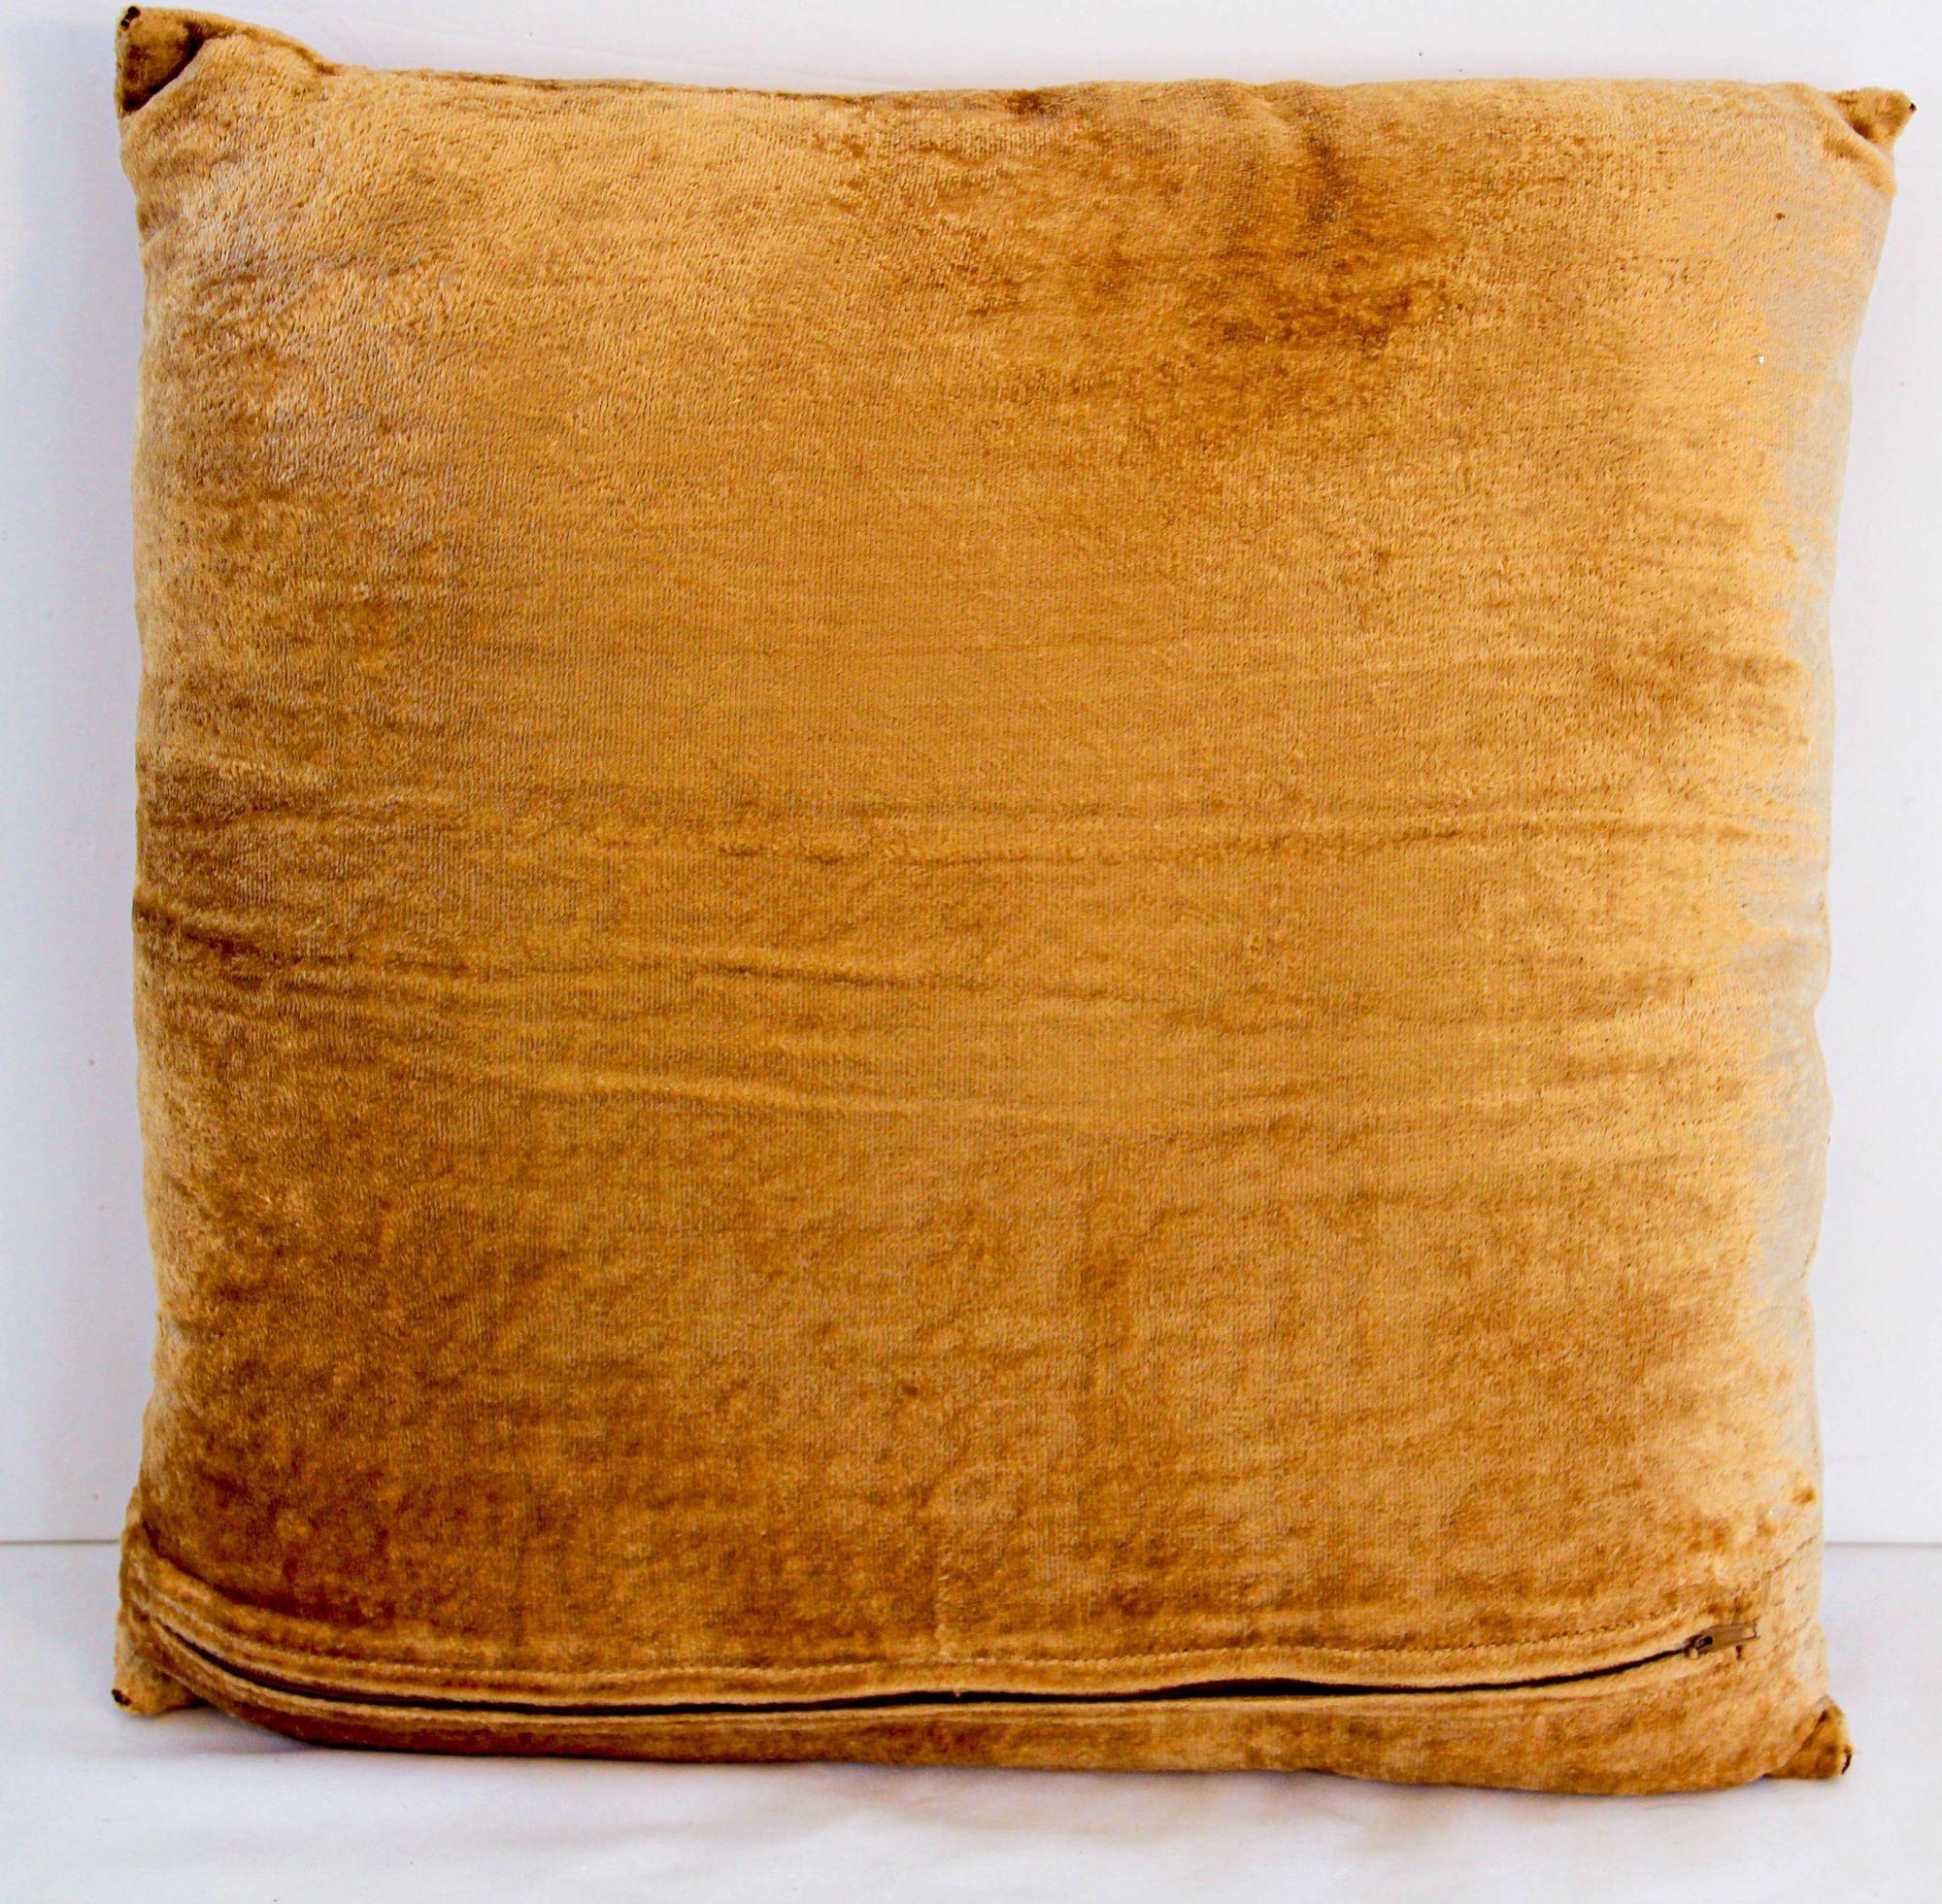 Vintage Velvet Pillow Tan and Gold Color Embroidered in Moorish Designs 3